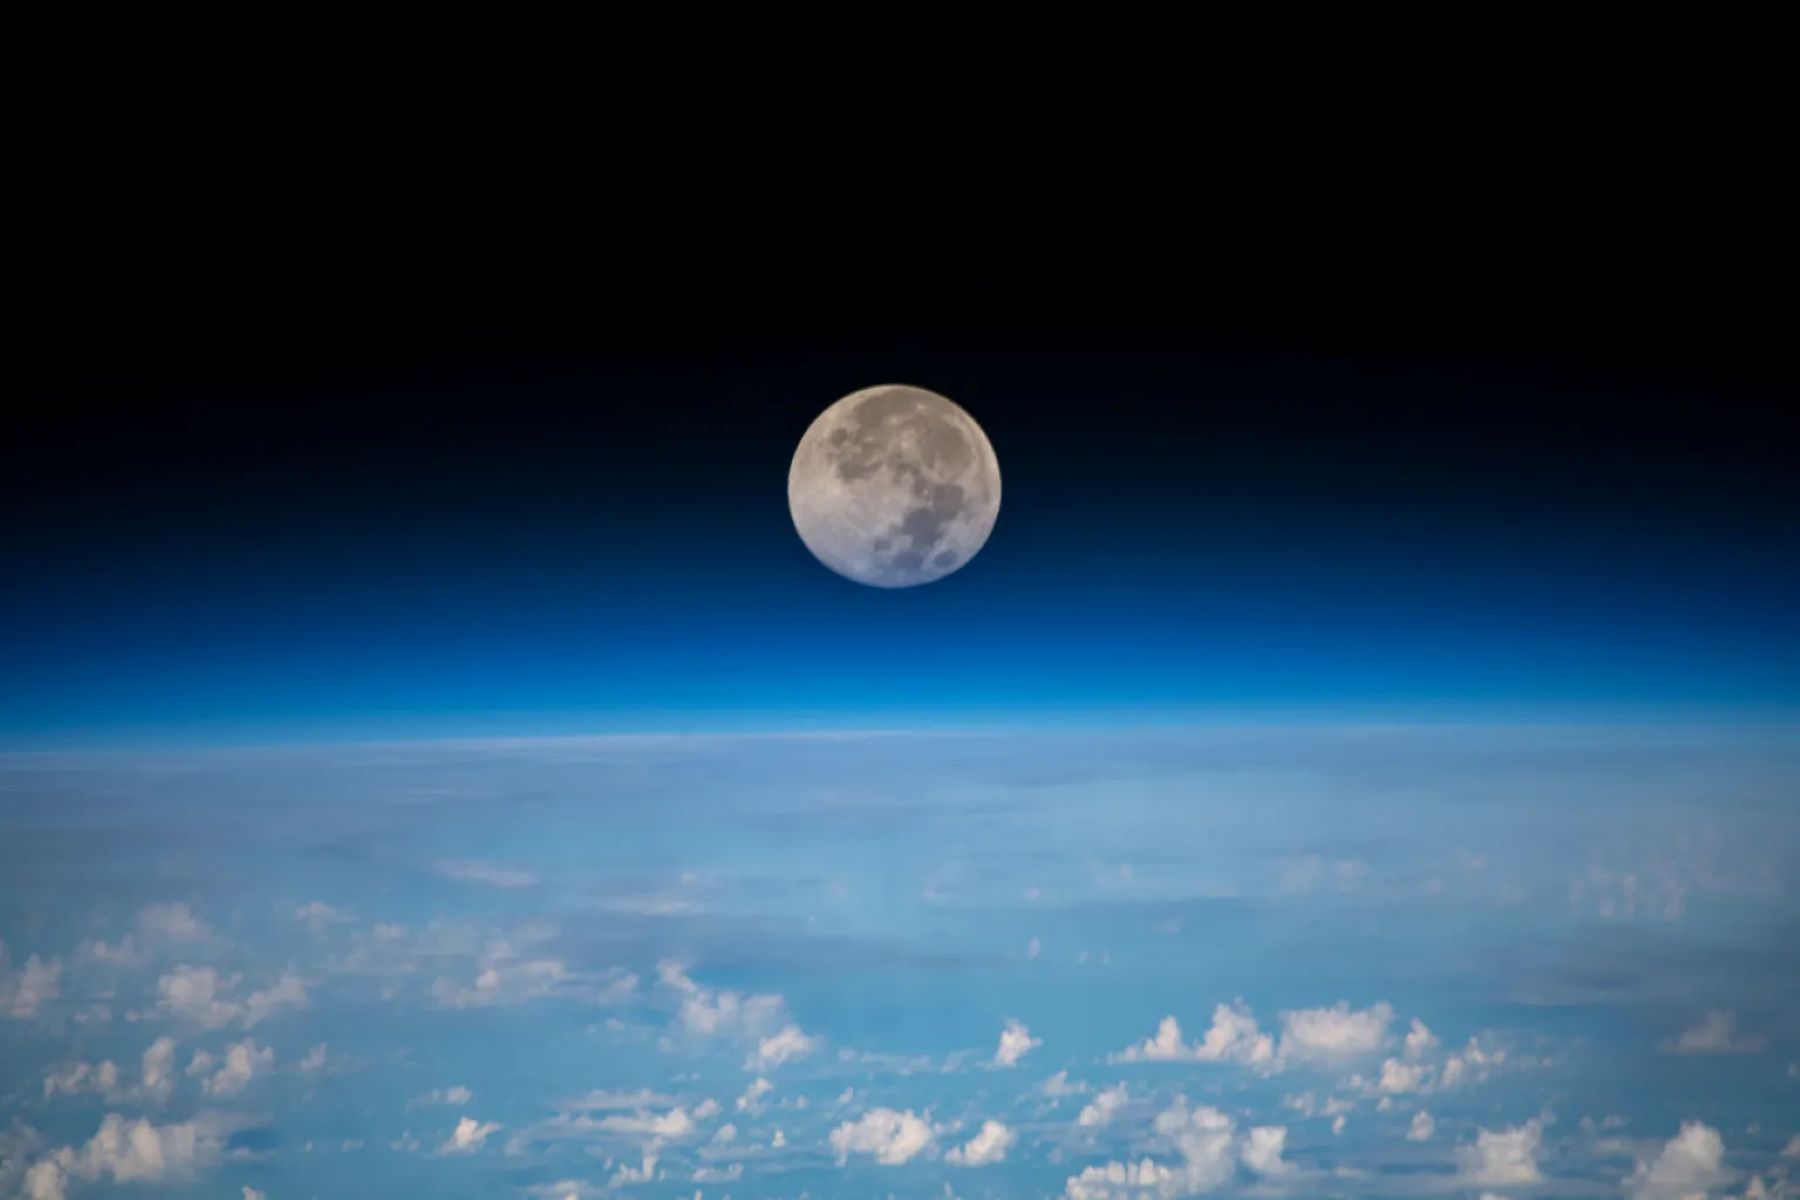 Space Station Research Advances NASA’s Plans to Explore the Moon, Mars